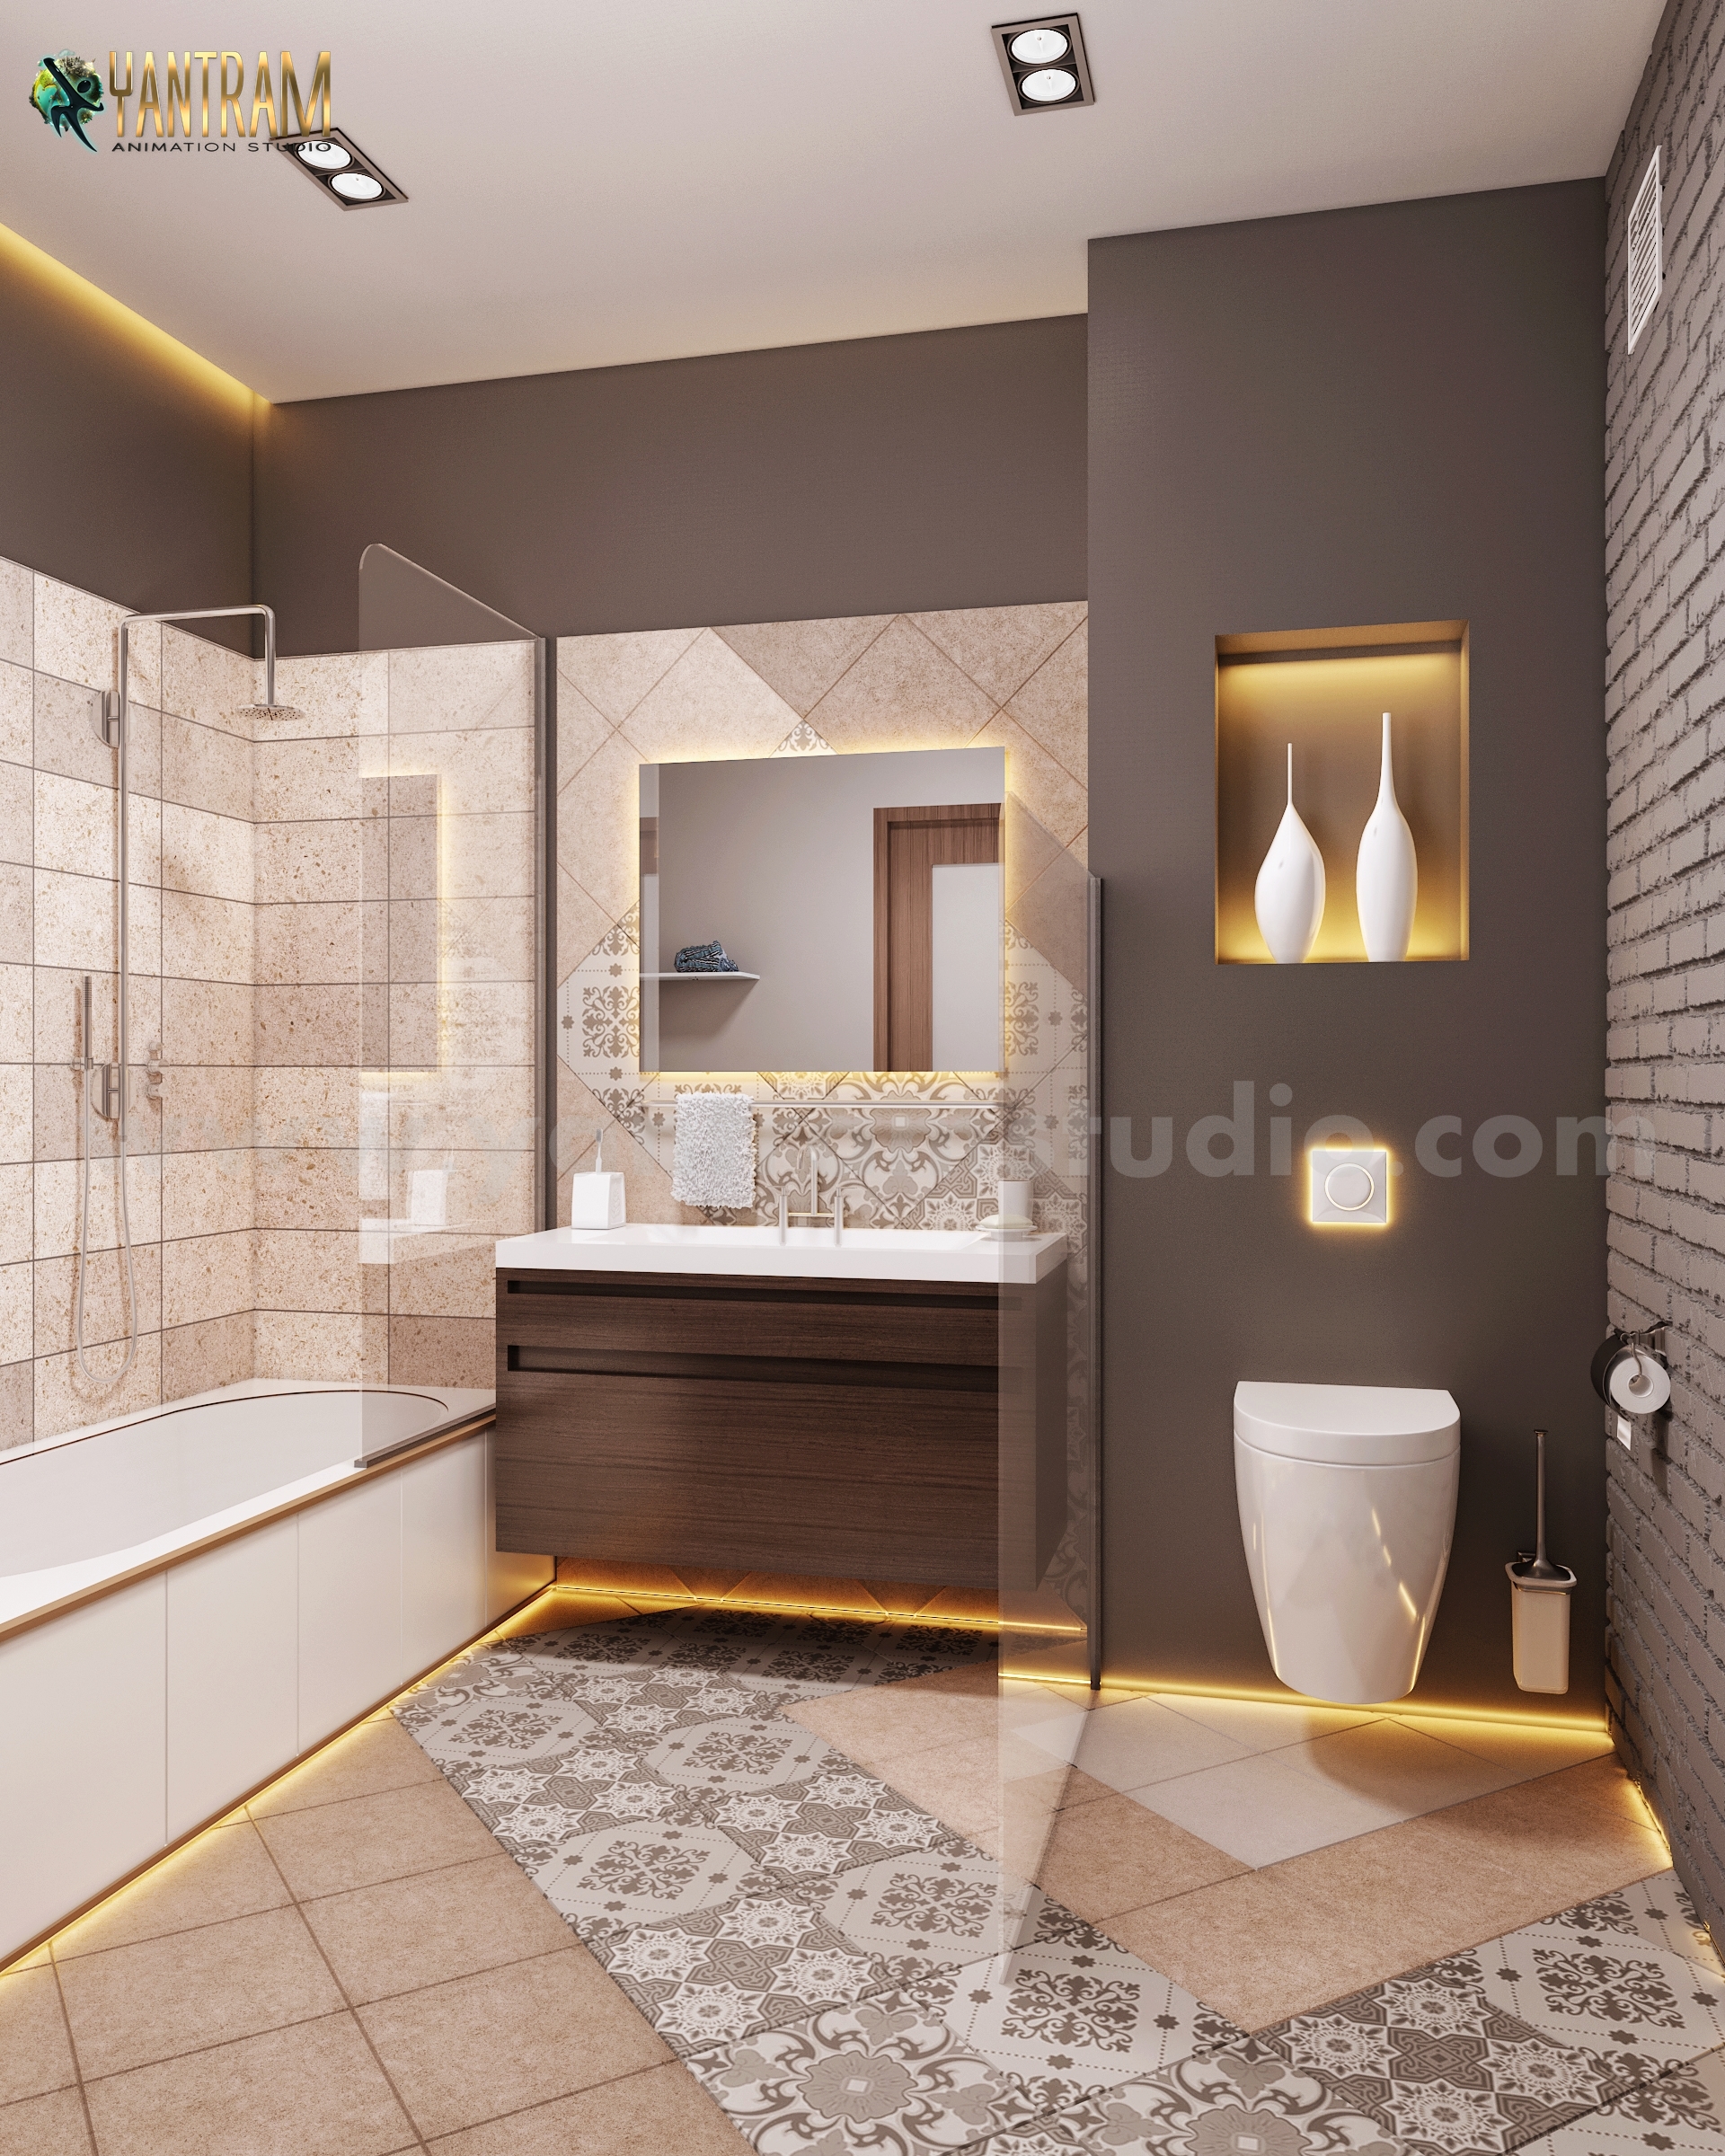 3d interior rendering of Contemporary Bathroom by Yantram Architectural Animation Services, Qatar – Doha